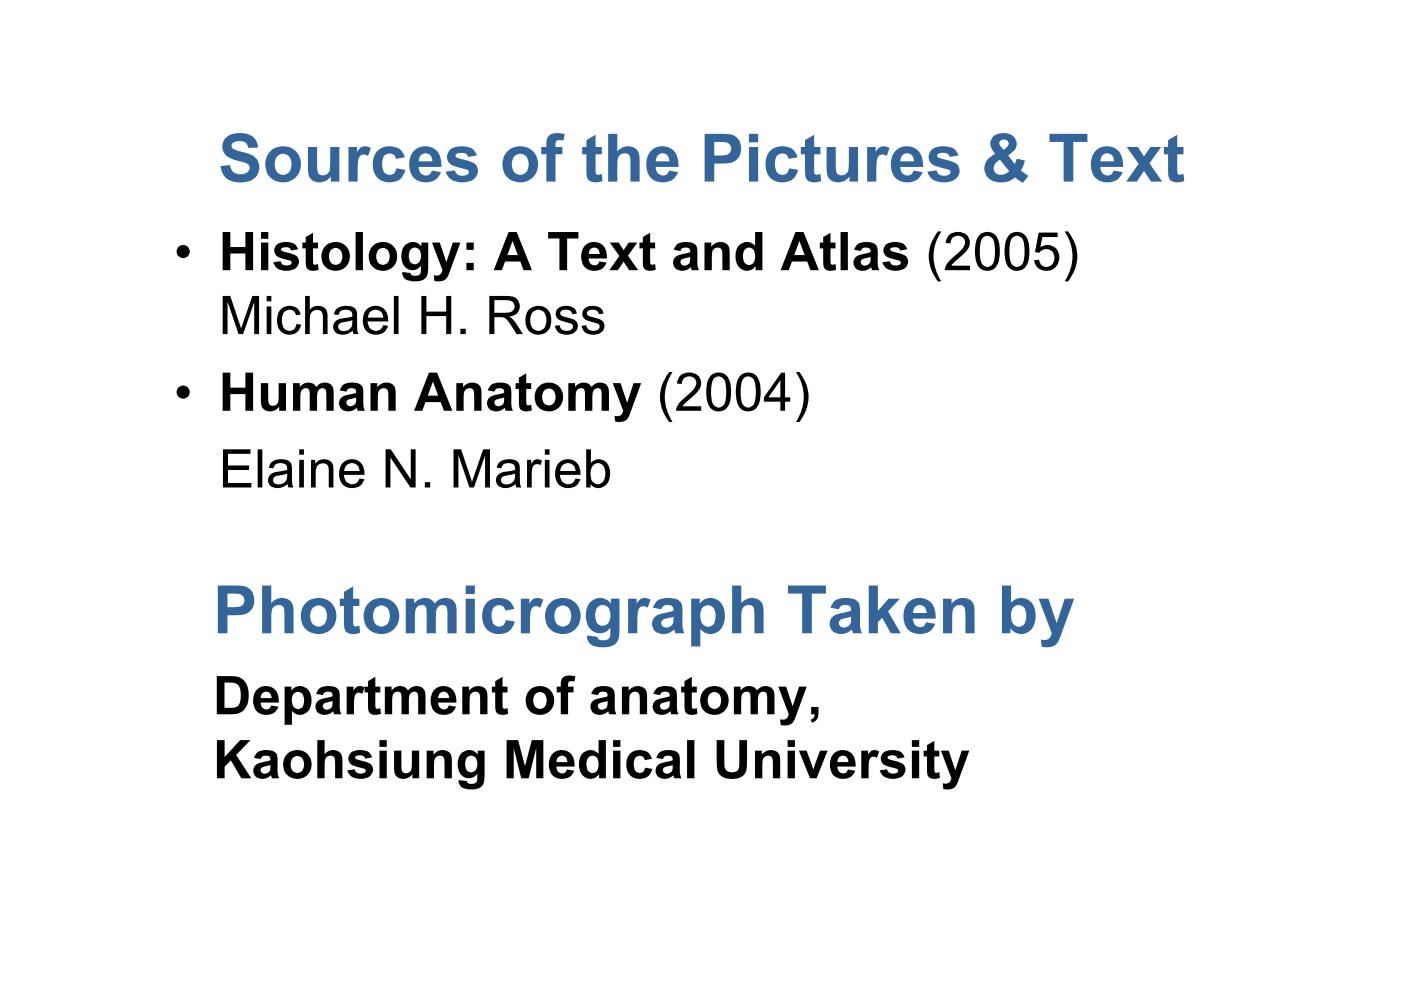 block9_02.jpg - Sources of the Pictures & Text¡E Histology: A Text and Atlas (2005)  Michael H. Ross¡E Human Anatomy (2004)  Elaine N. Marieb Photomicrograph Taken by Department of anatomy, Kaohsiung Medical University